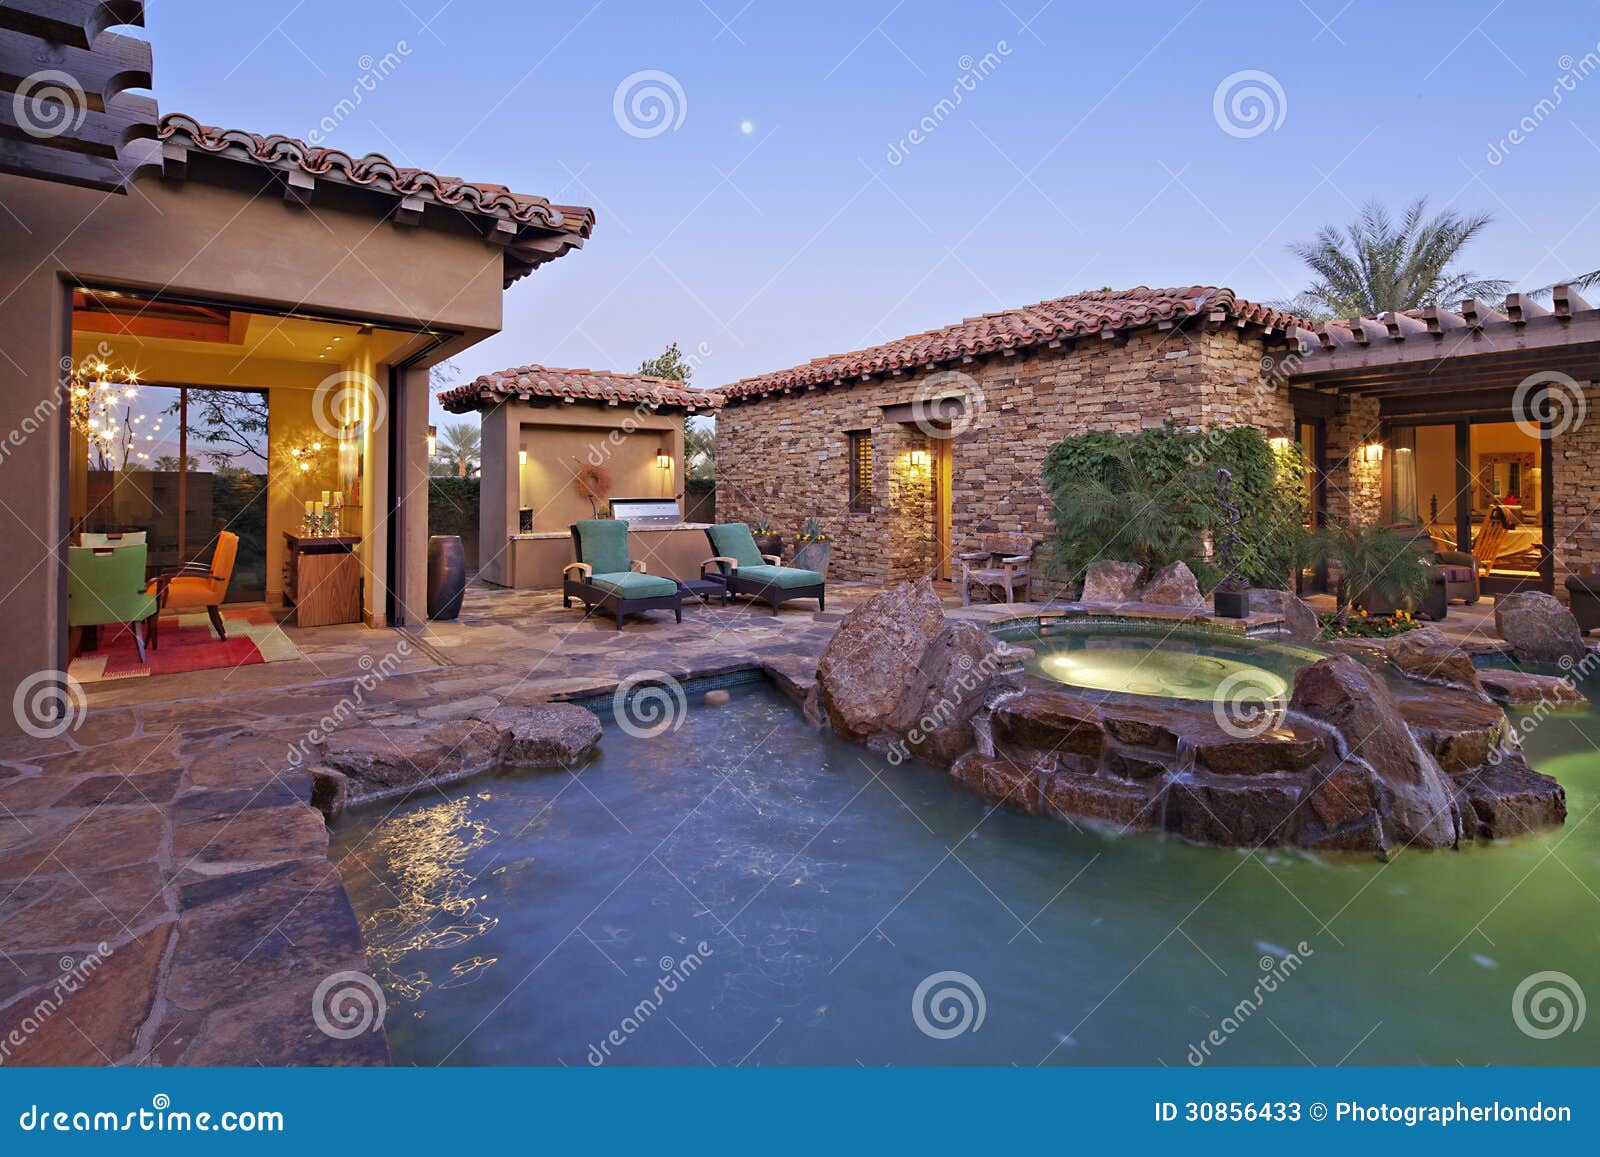 house exterior with swimming pool and hot tub